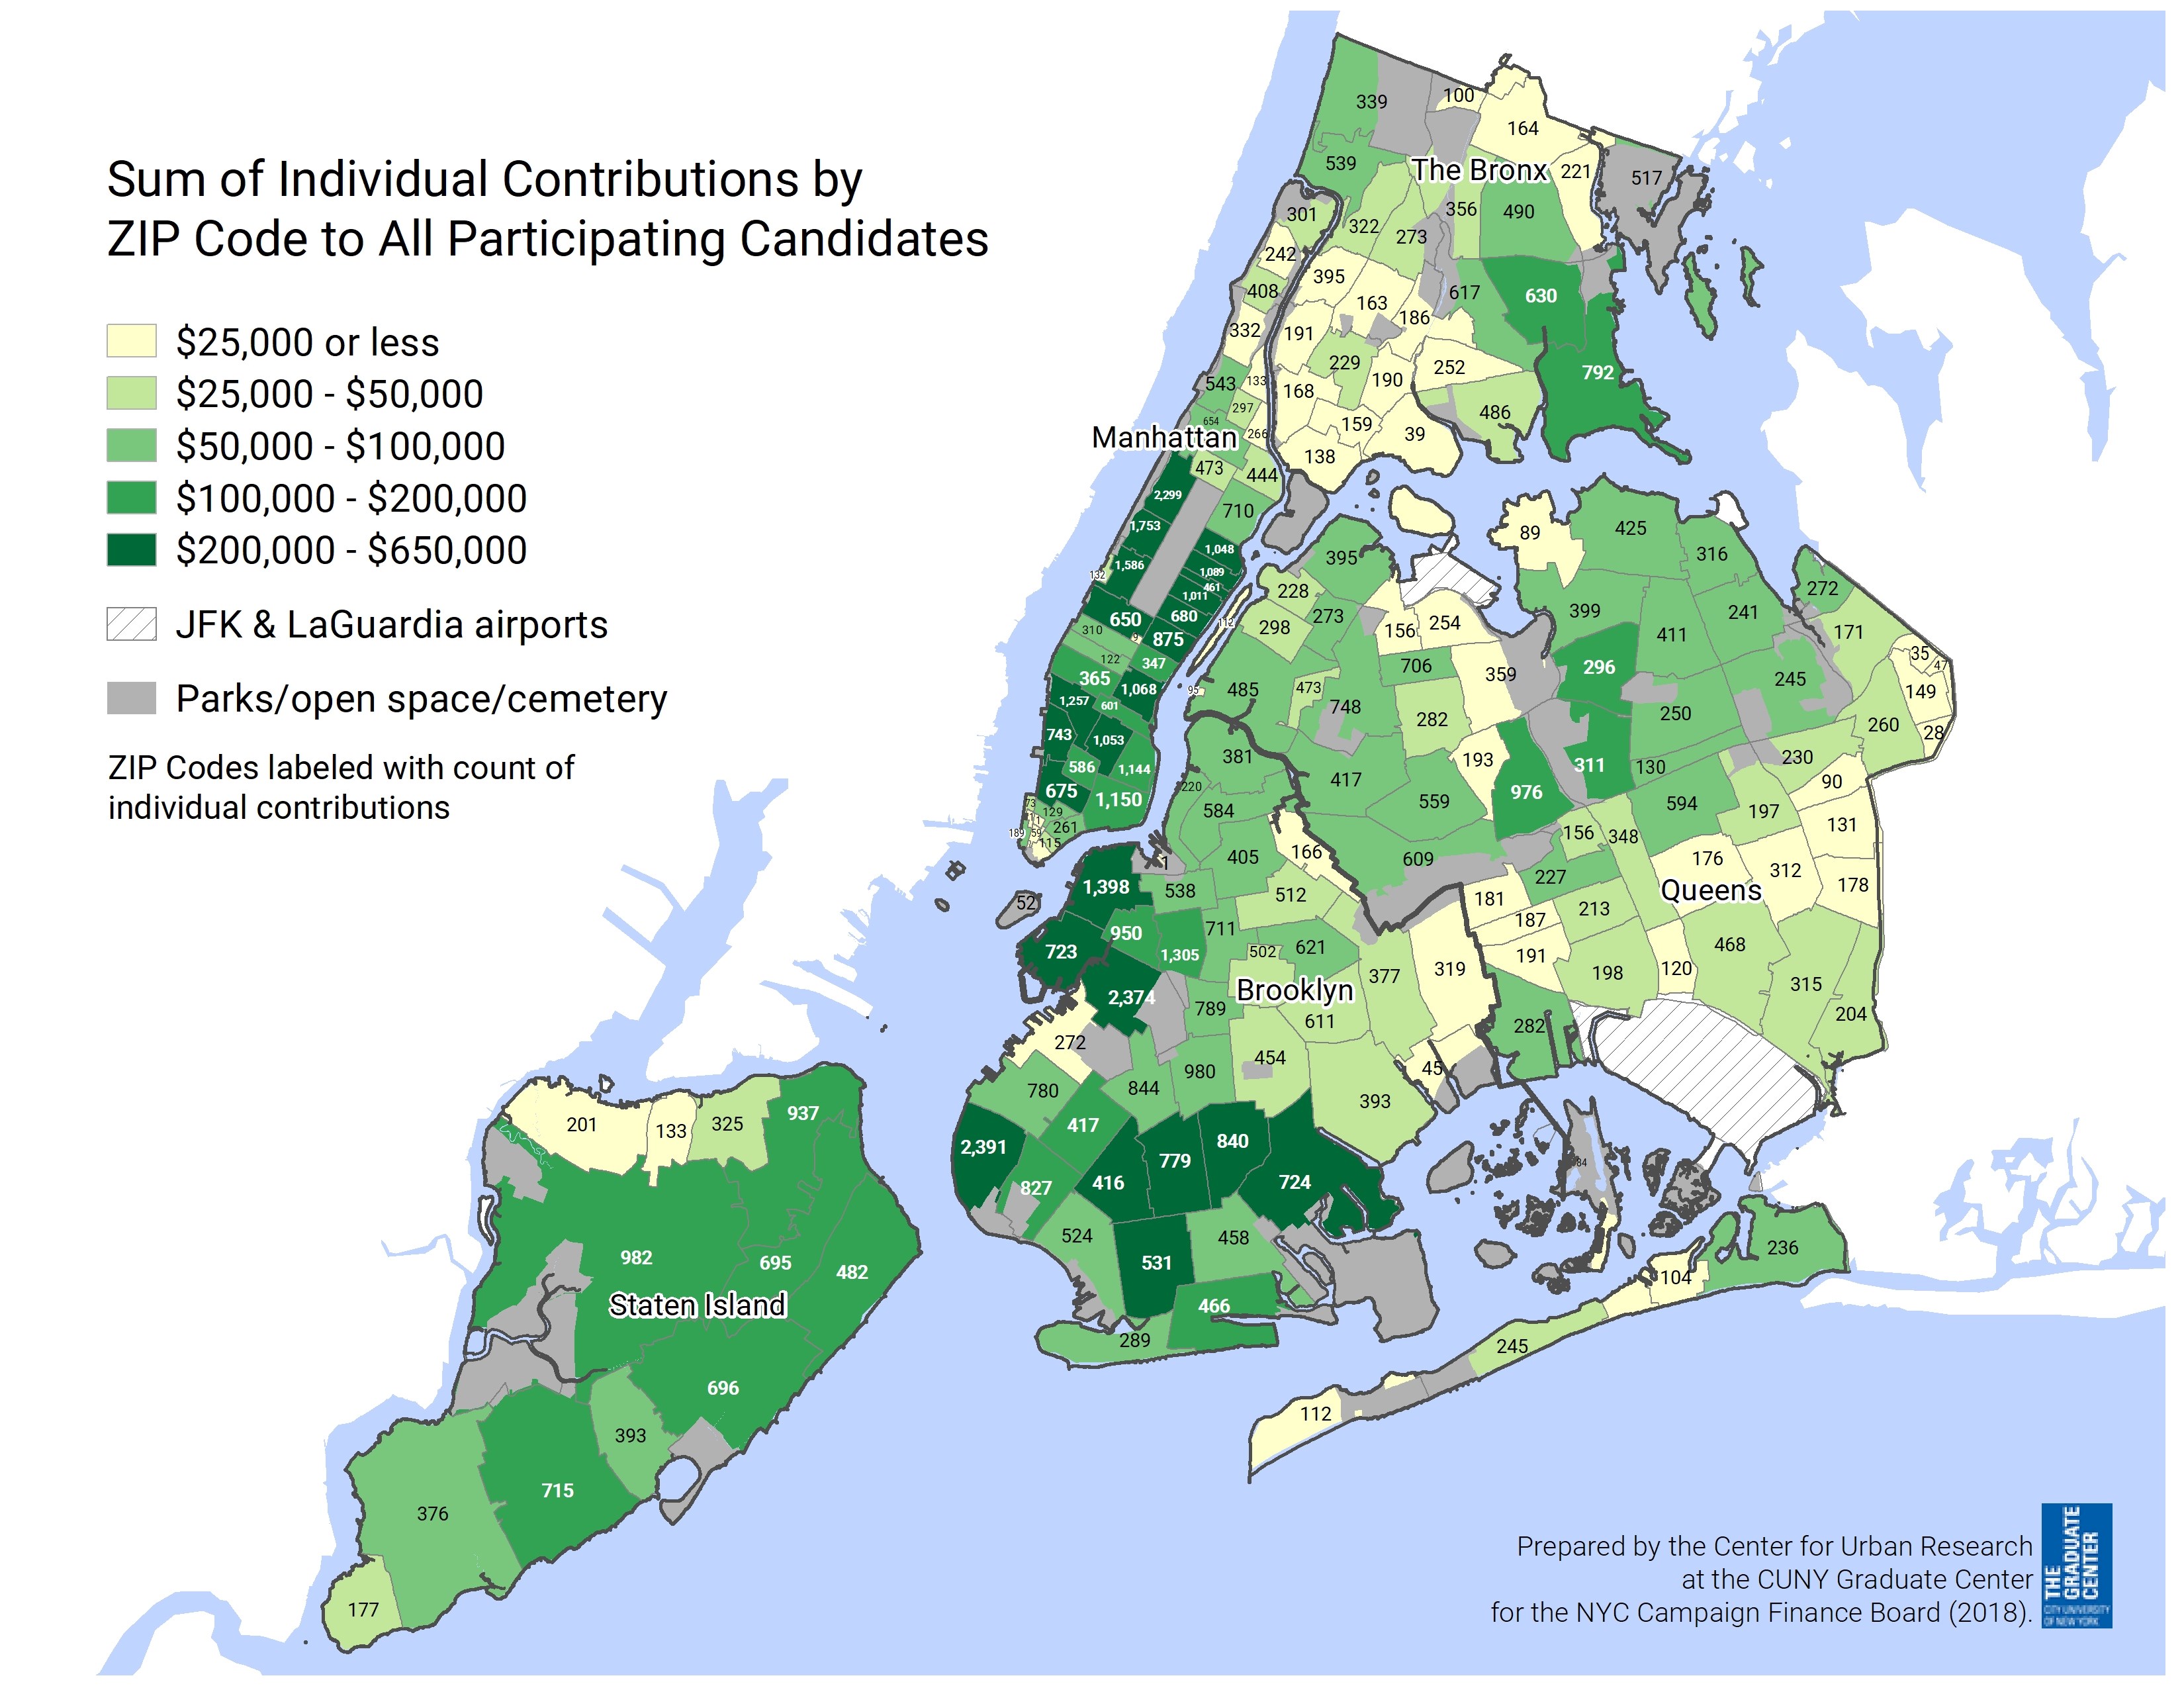 Map of New York showing the sum of all indicual contributions by ZIP Code to participating candidates